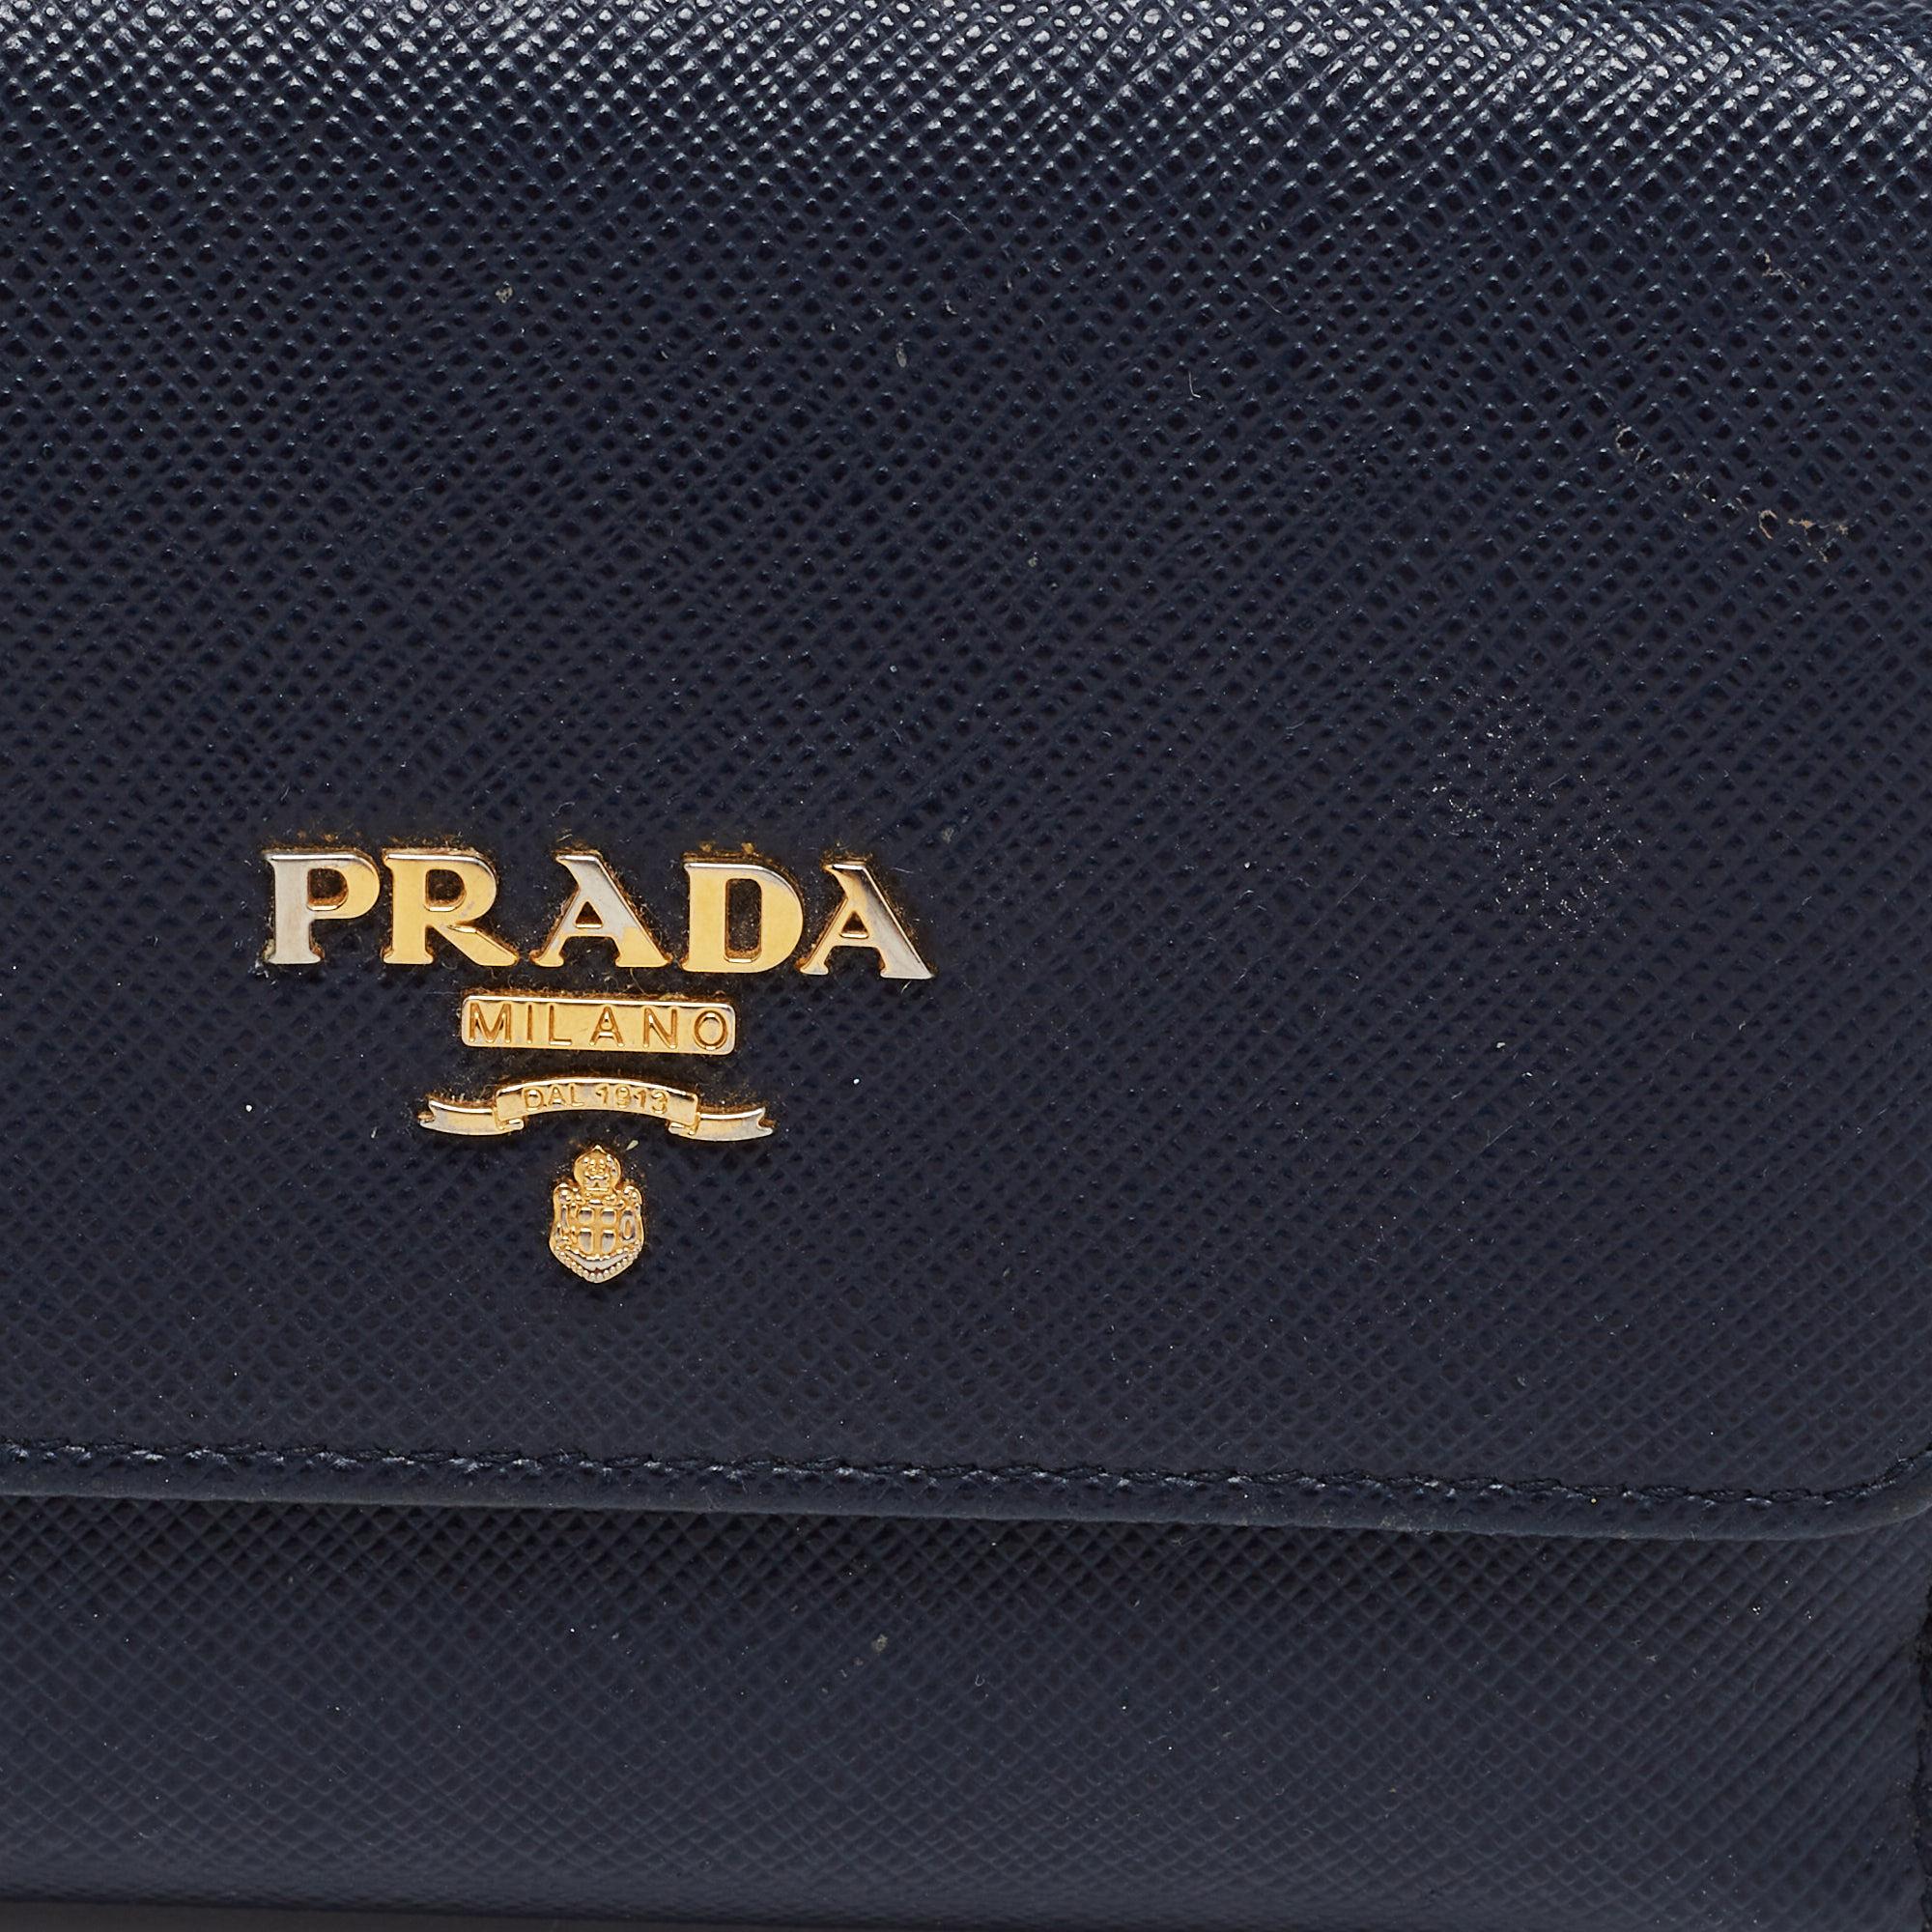 Prada Navy Blue Saffiano Metal Leather French Compact Wallet 3